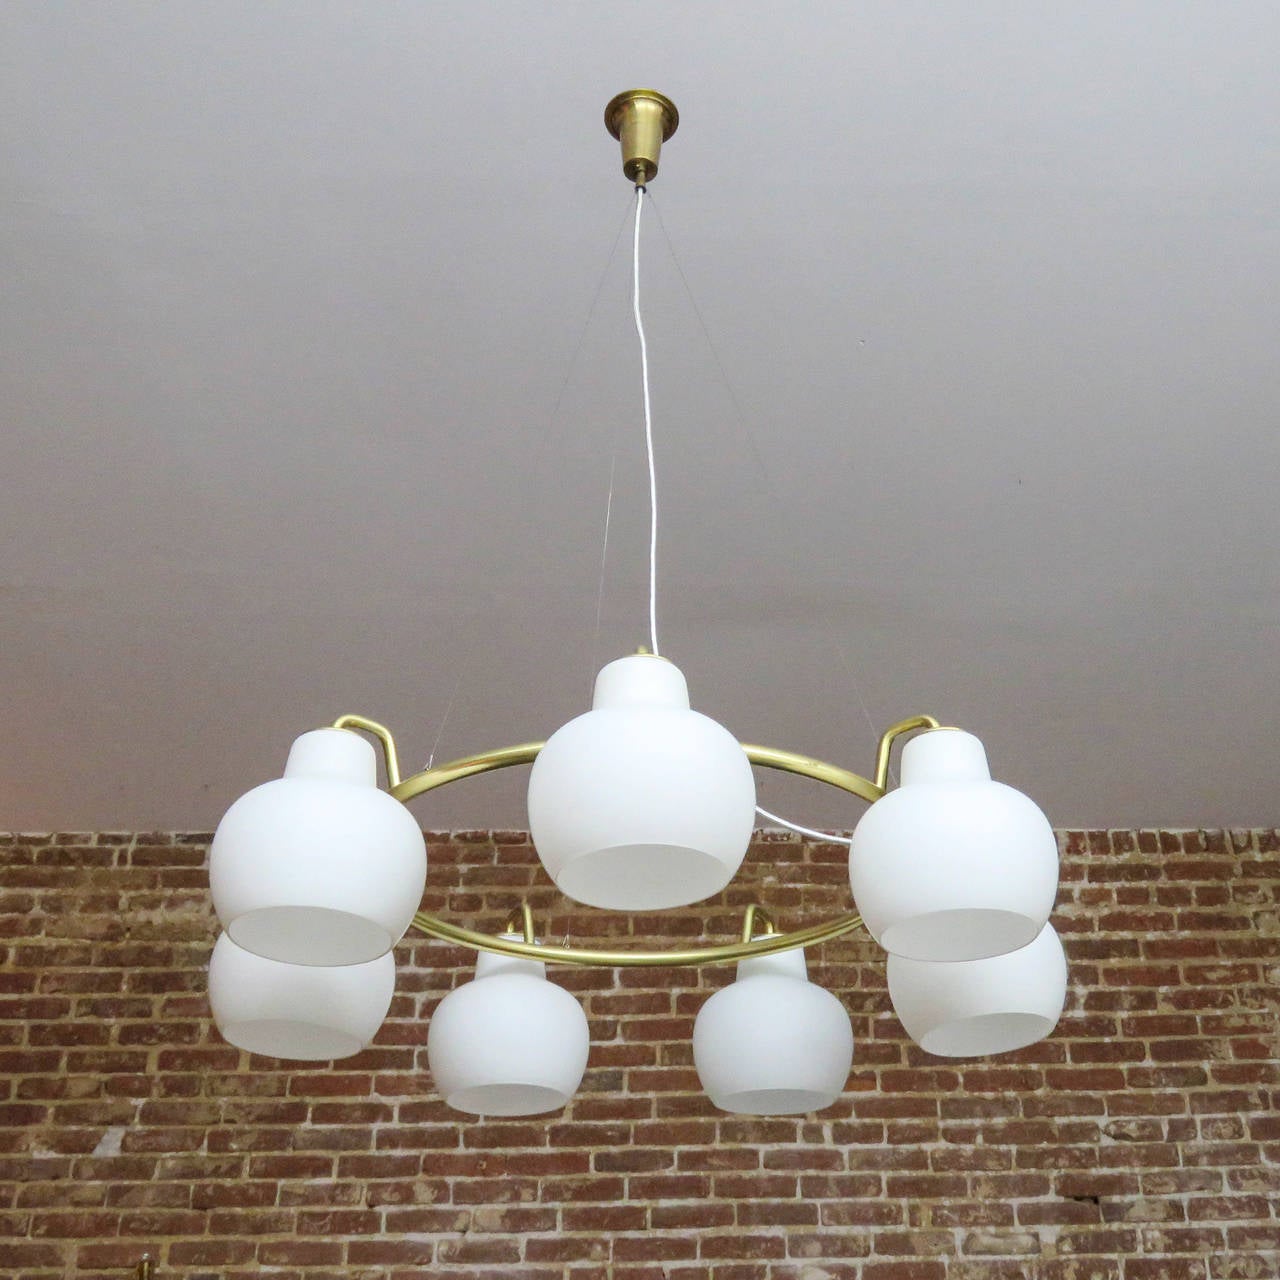 stunning, large scale Christiansborg / B&G Ring Chandelier by Vilhelm Lauritzen, with seven white opaline glass shades on a circular brass frame suspended from cables, height is adjustable